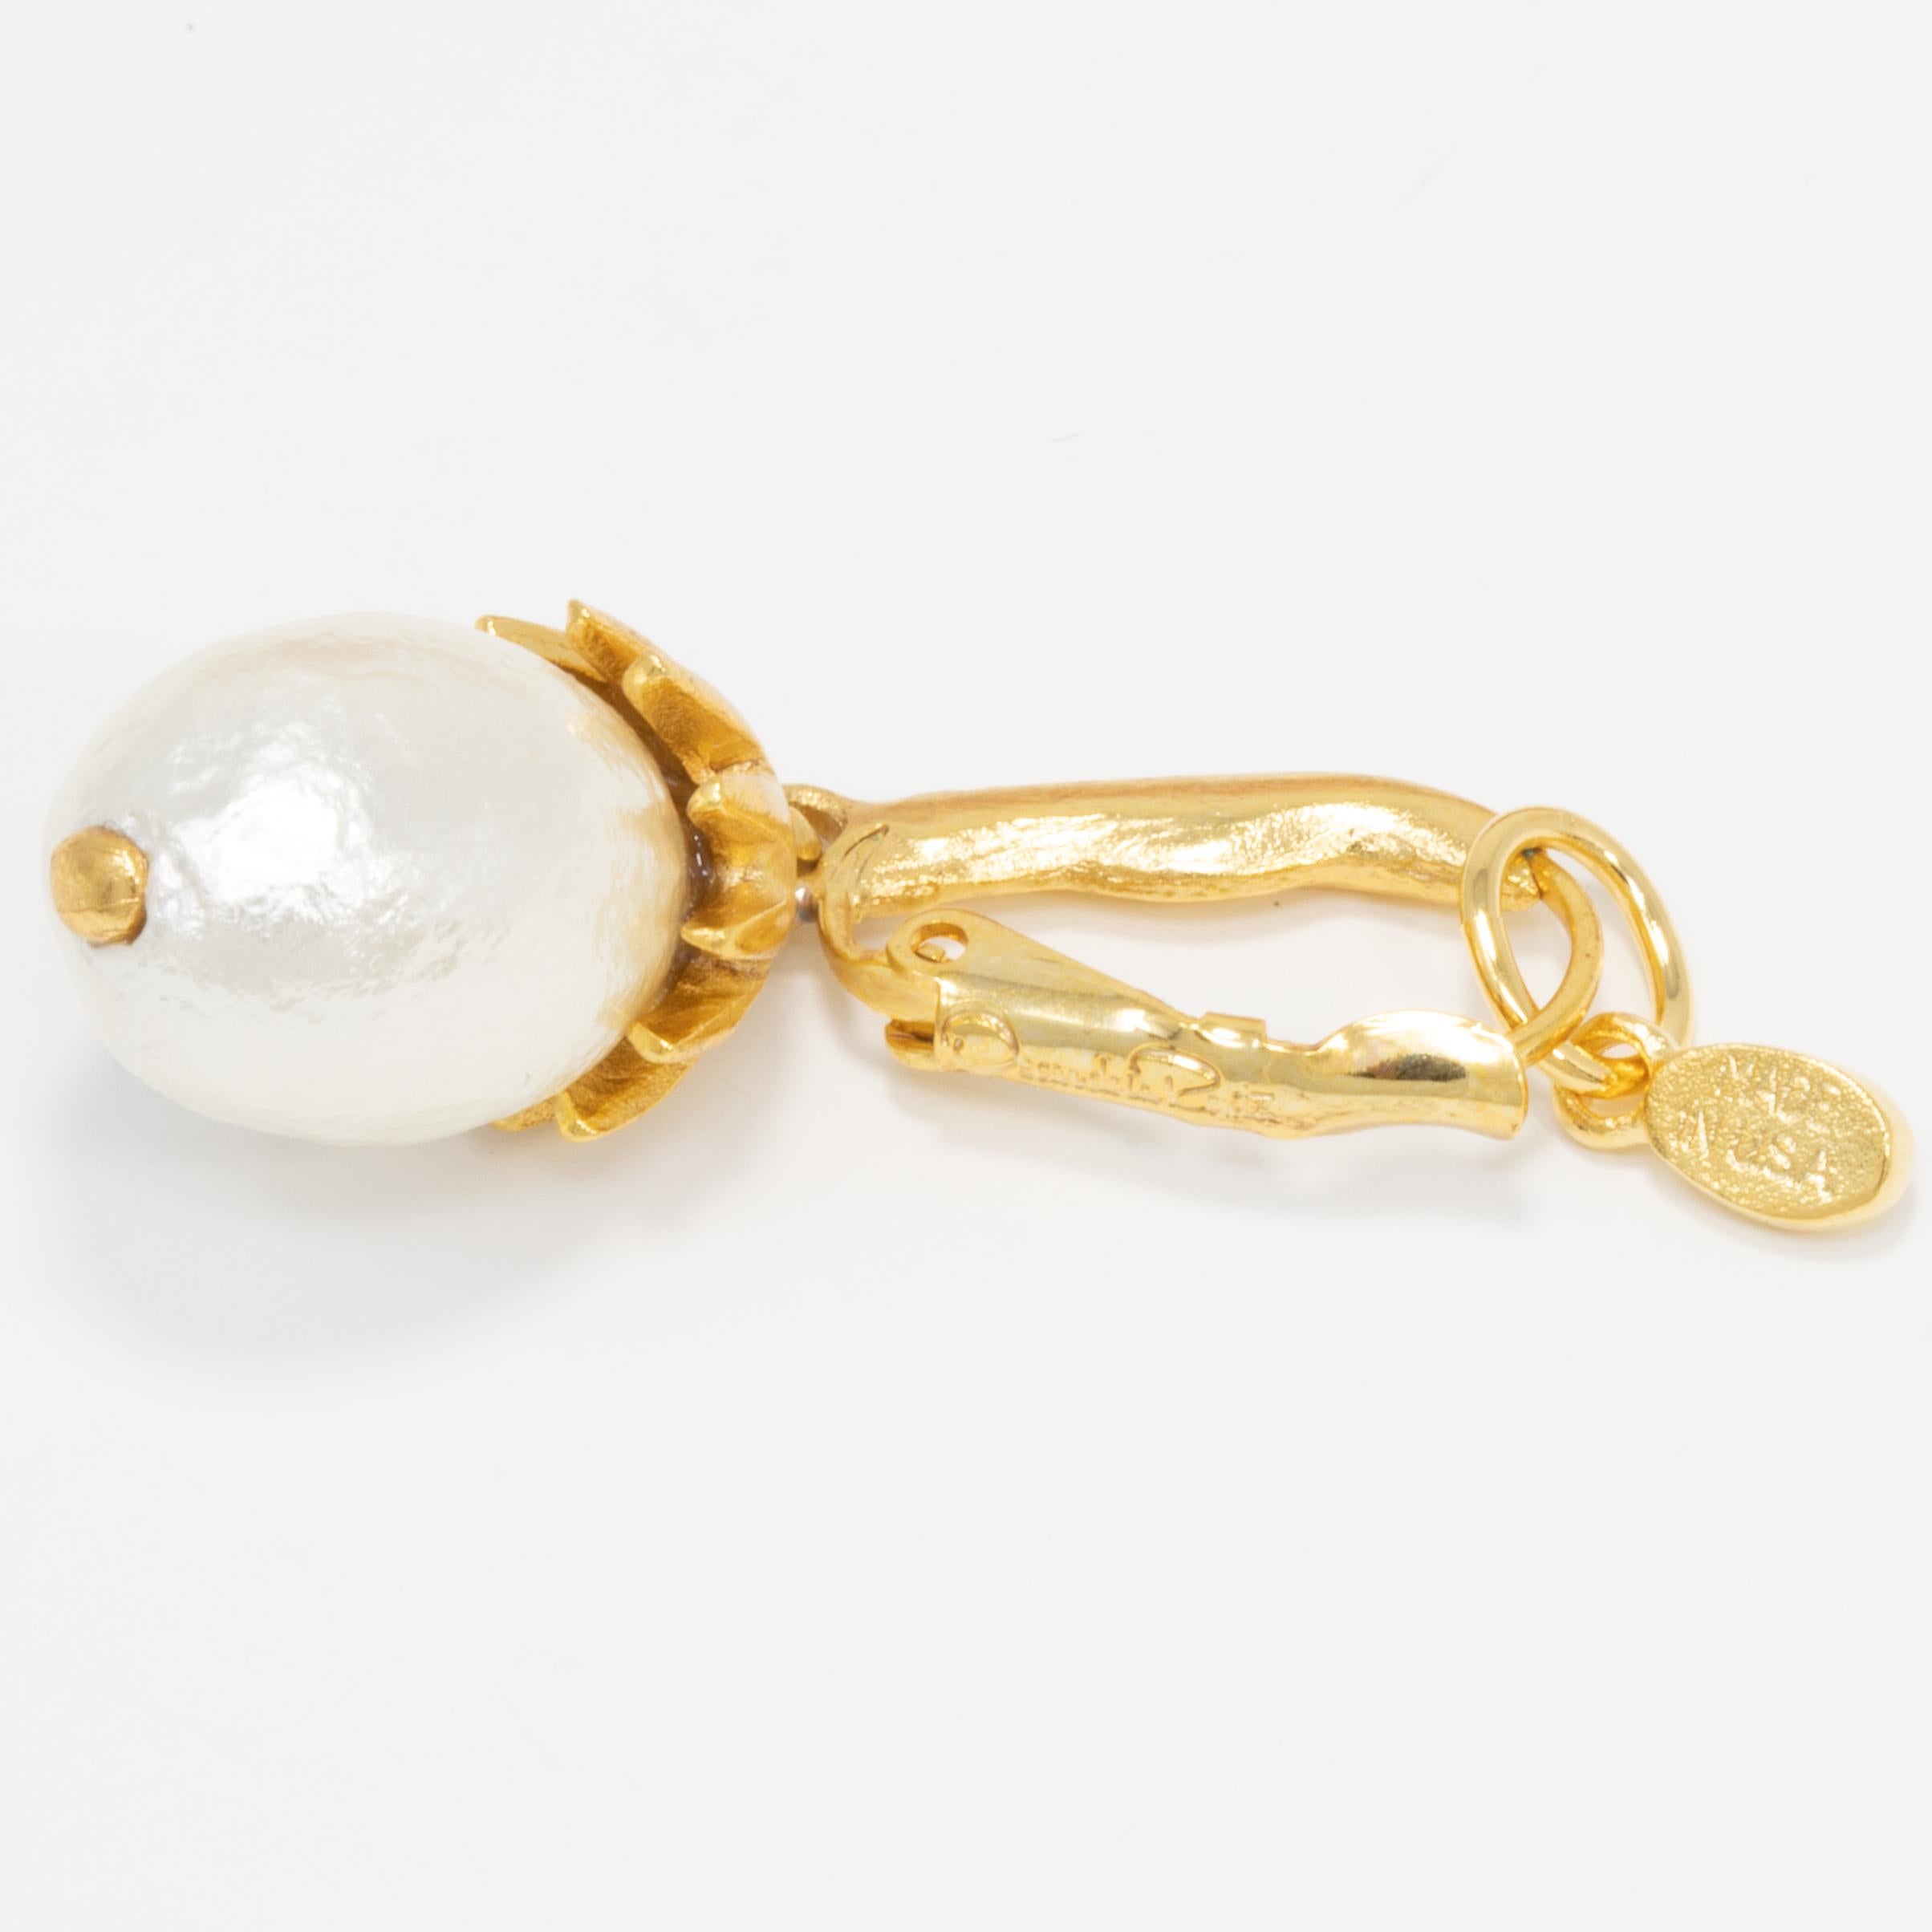 A pair of dangling earrings by Oscar de la Renta. a faux pearl hangs off of each gold-plated, hinged, French hook.

Marks / Hallmarks / Signs: Ocar de la Renta, Made in USA

